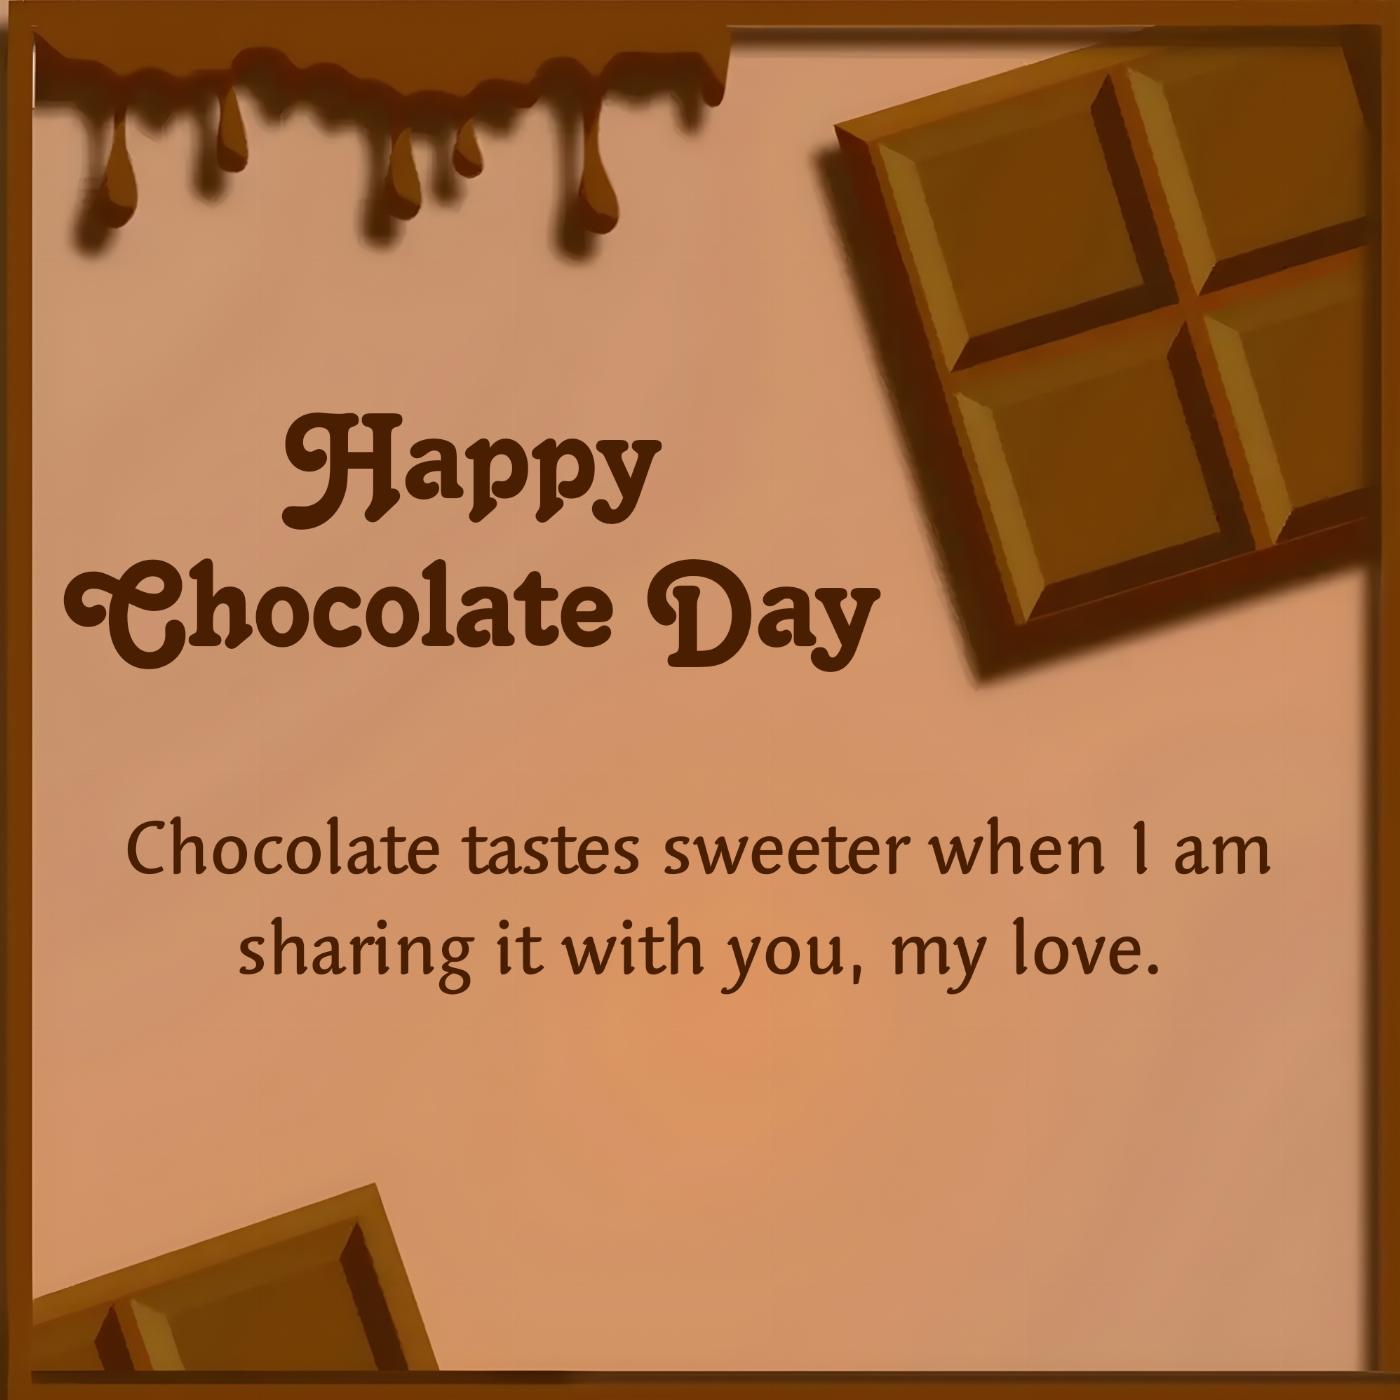 Chocolate tastes sweeter when I am sharing it with you